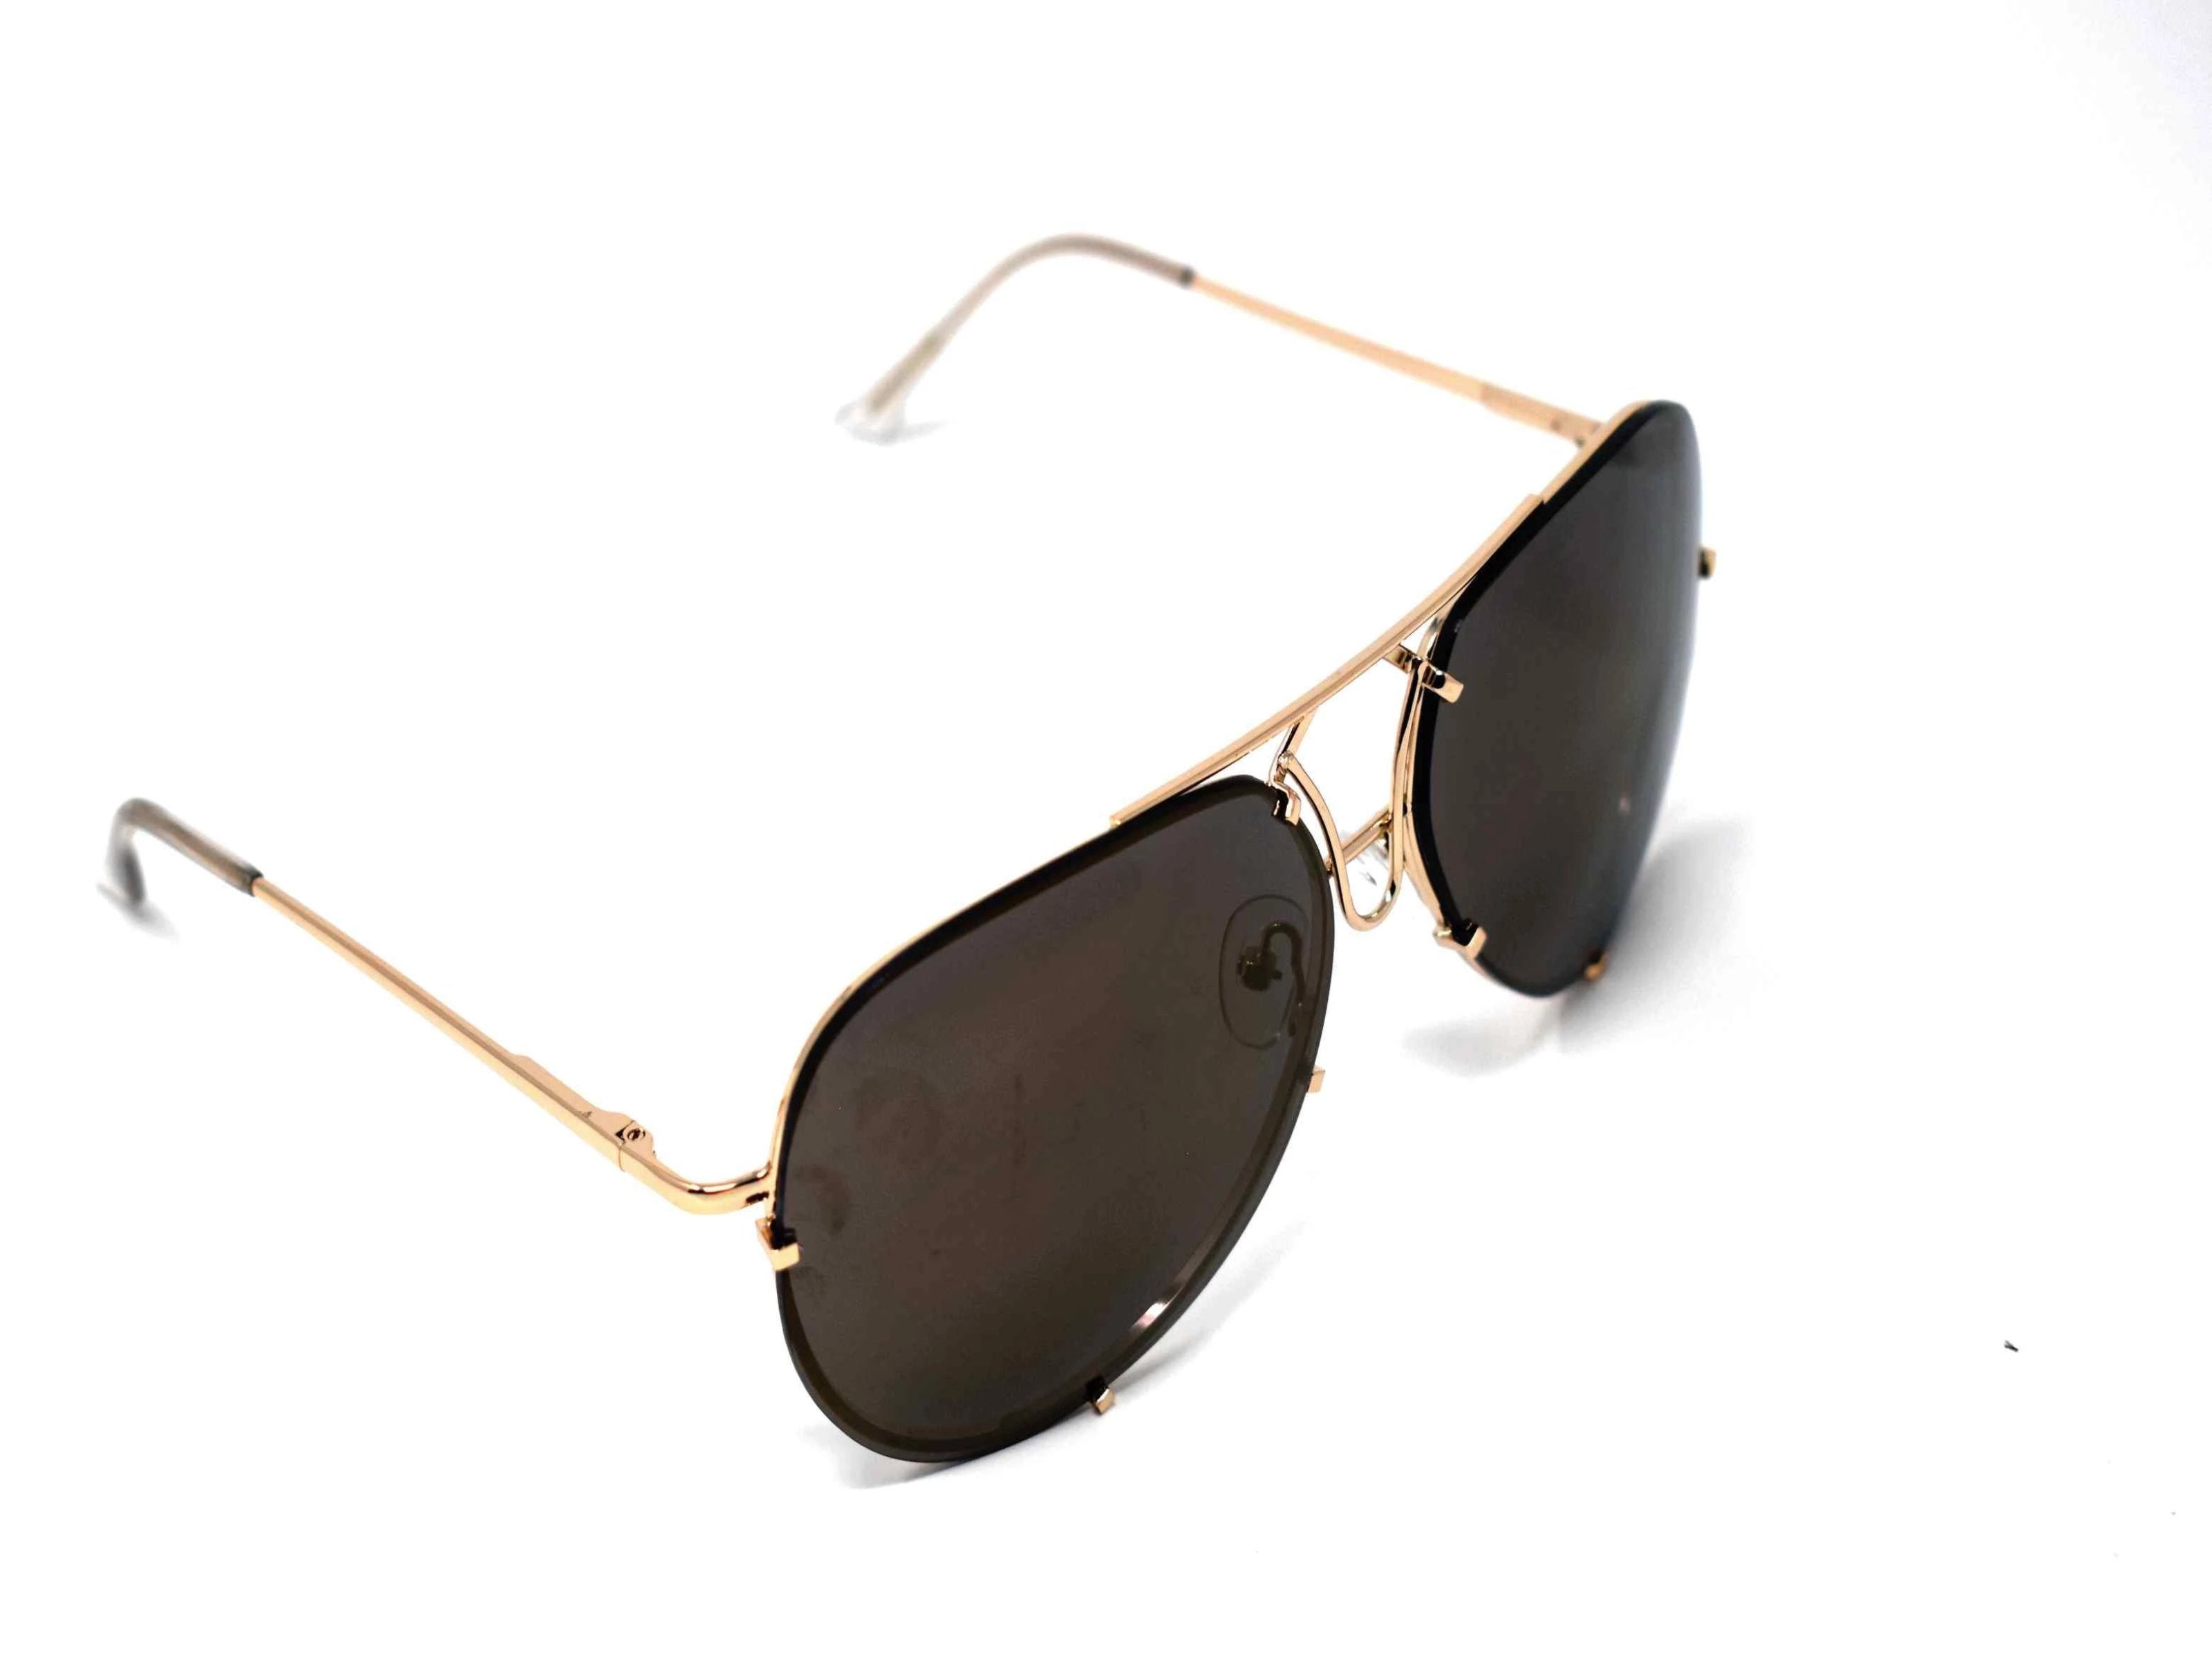 Don't get caught without these yarrow gold frame dark green mirrored lens aviator sunglasses.